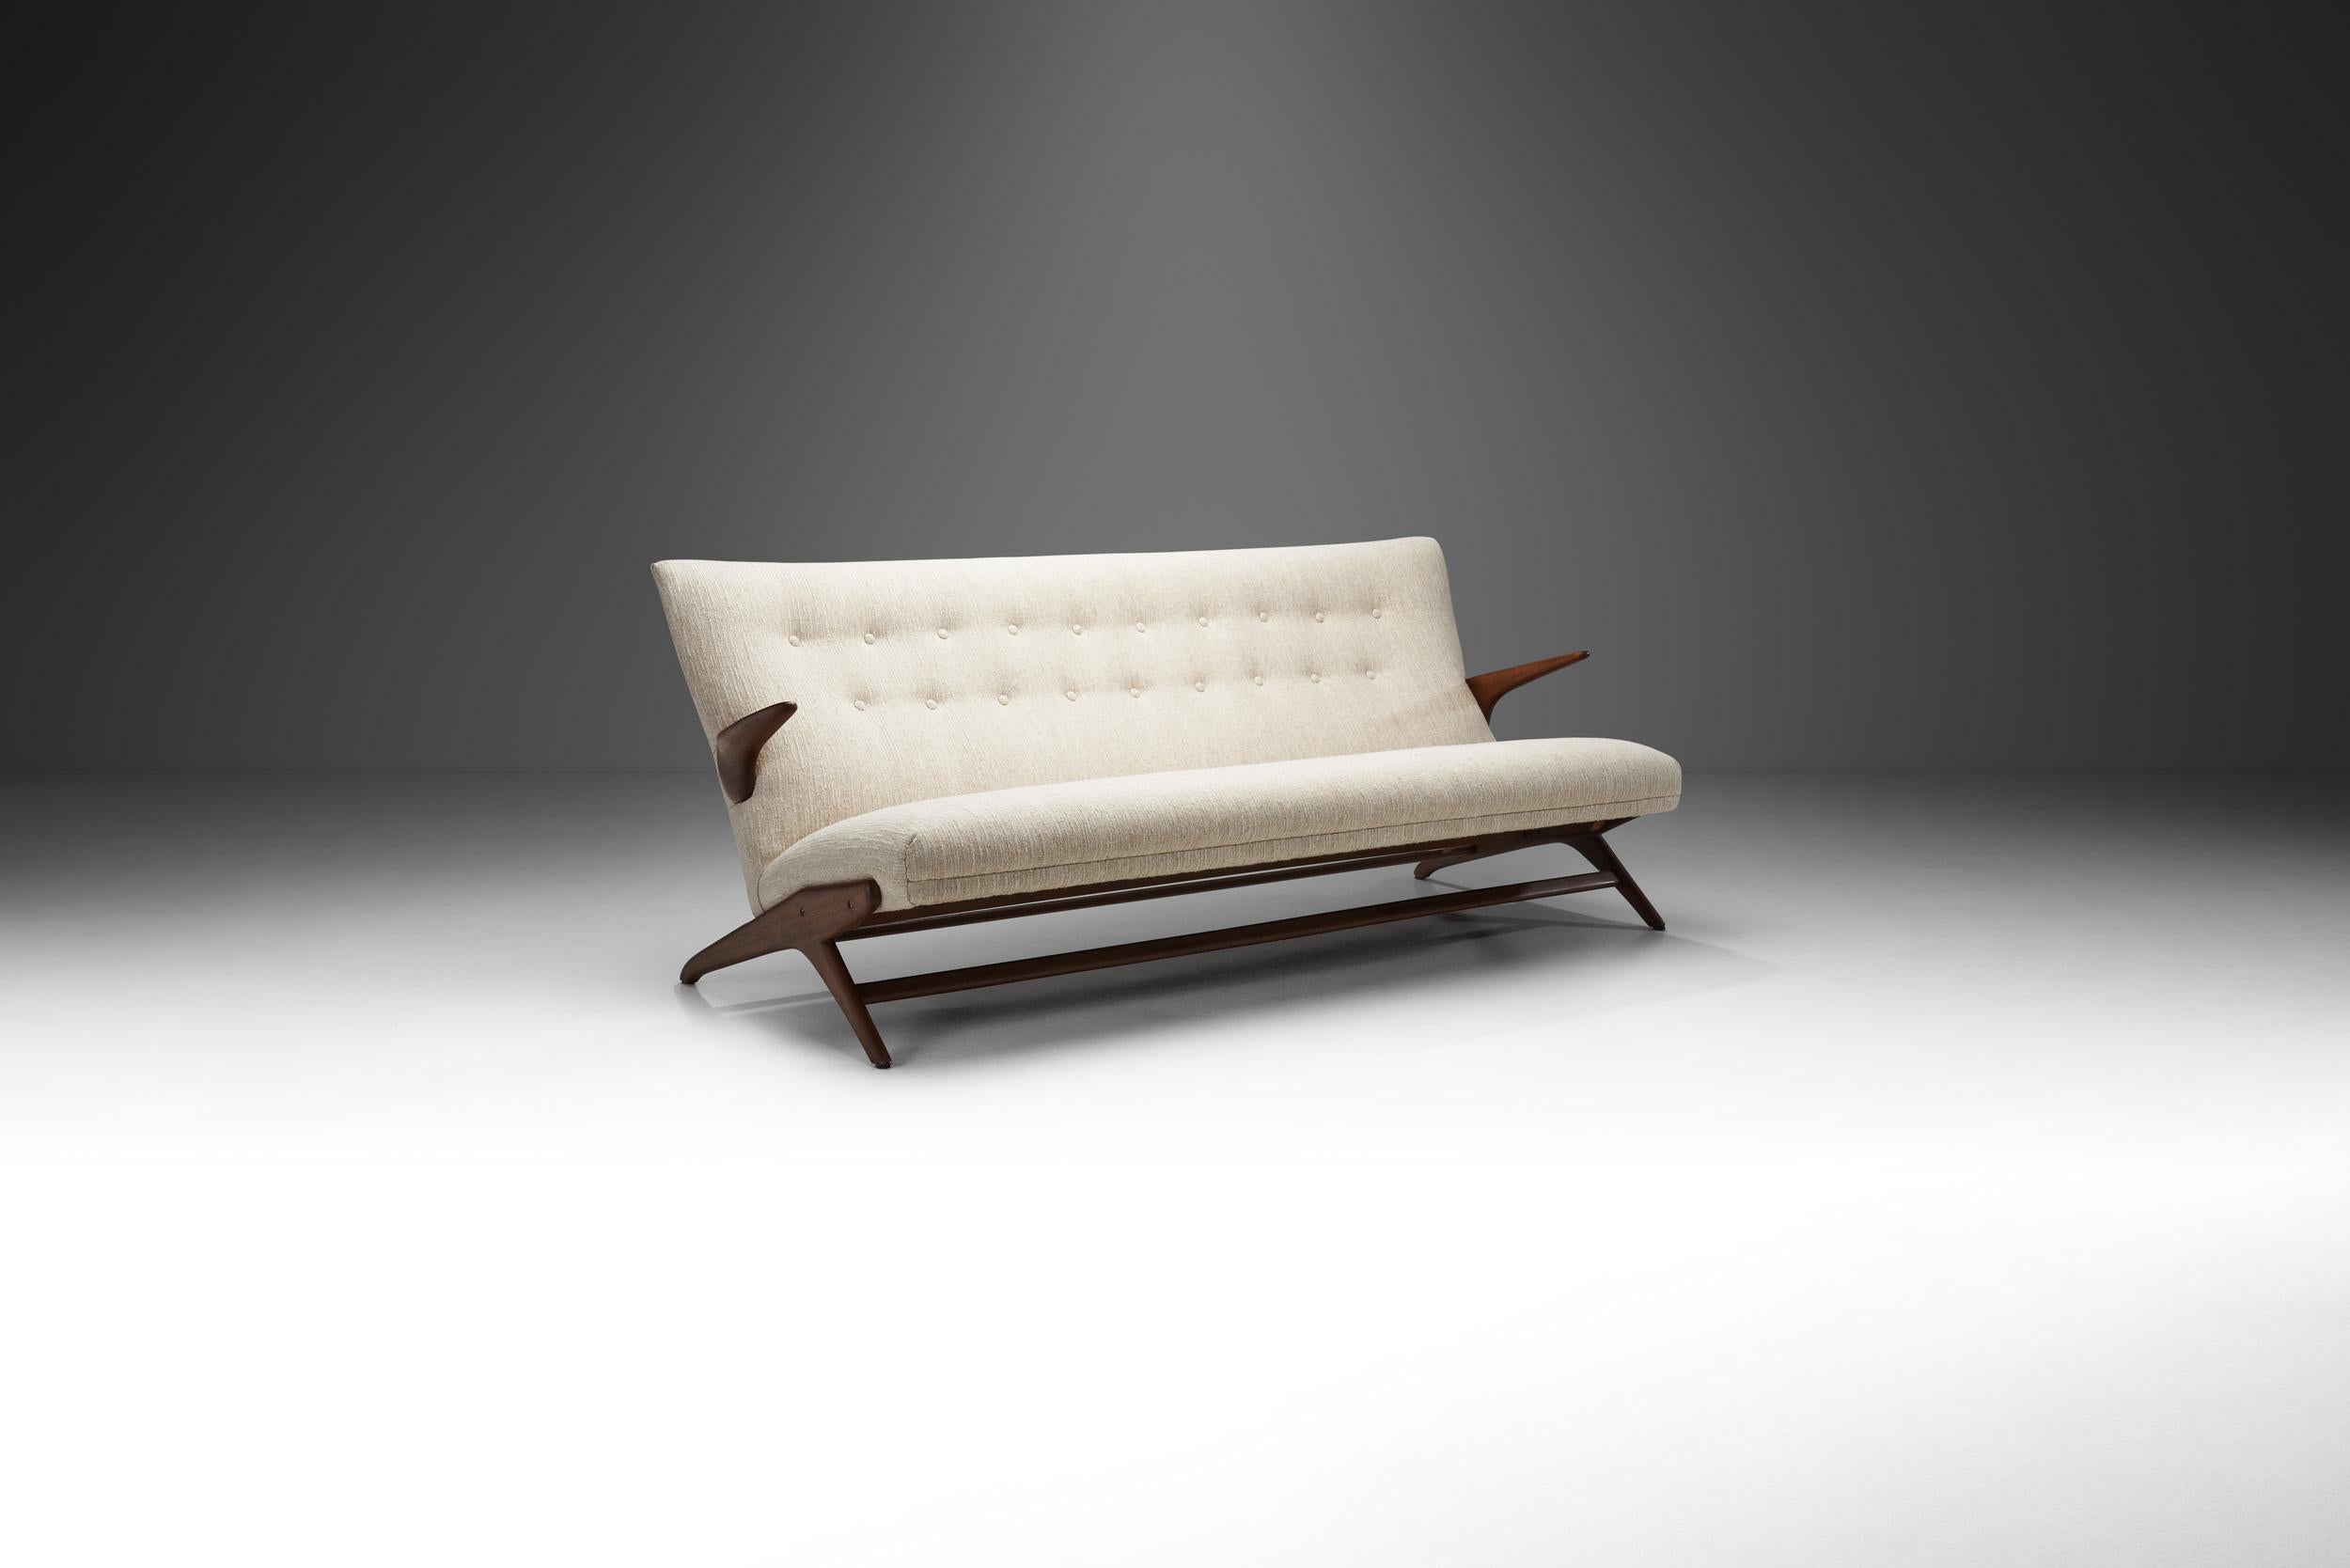 Though the advent of new materials like plastic, foam, and fibreglass revolutionized the production process, Scandinavian designers still valued craft over industrialization. This sculptural sofa is a beautiful evidence of this heritage and the